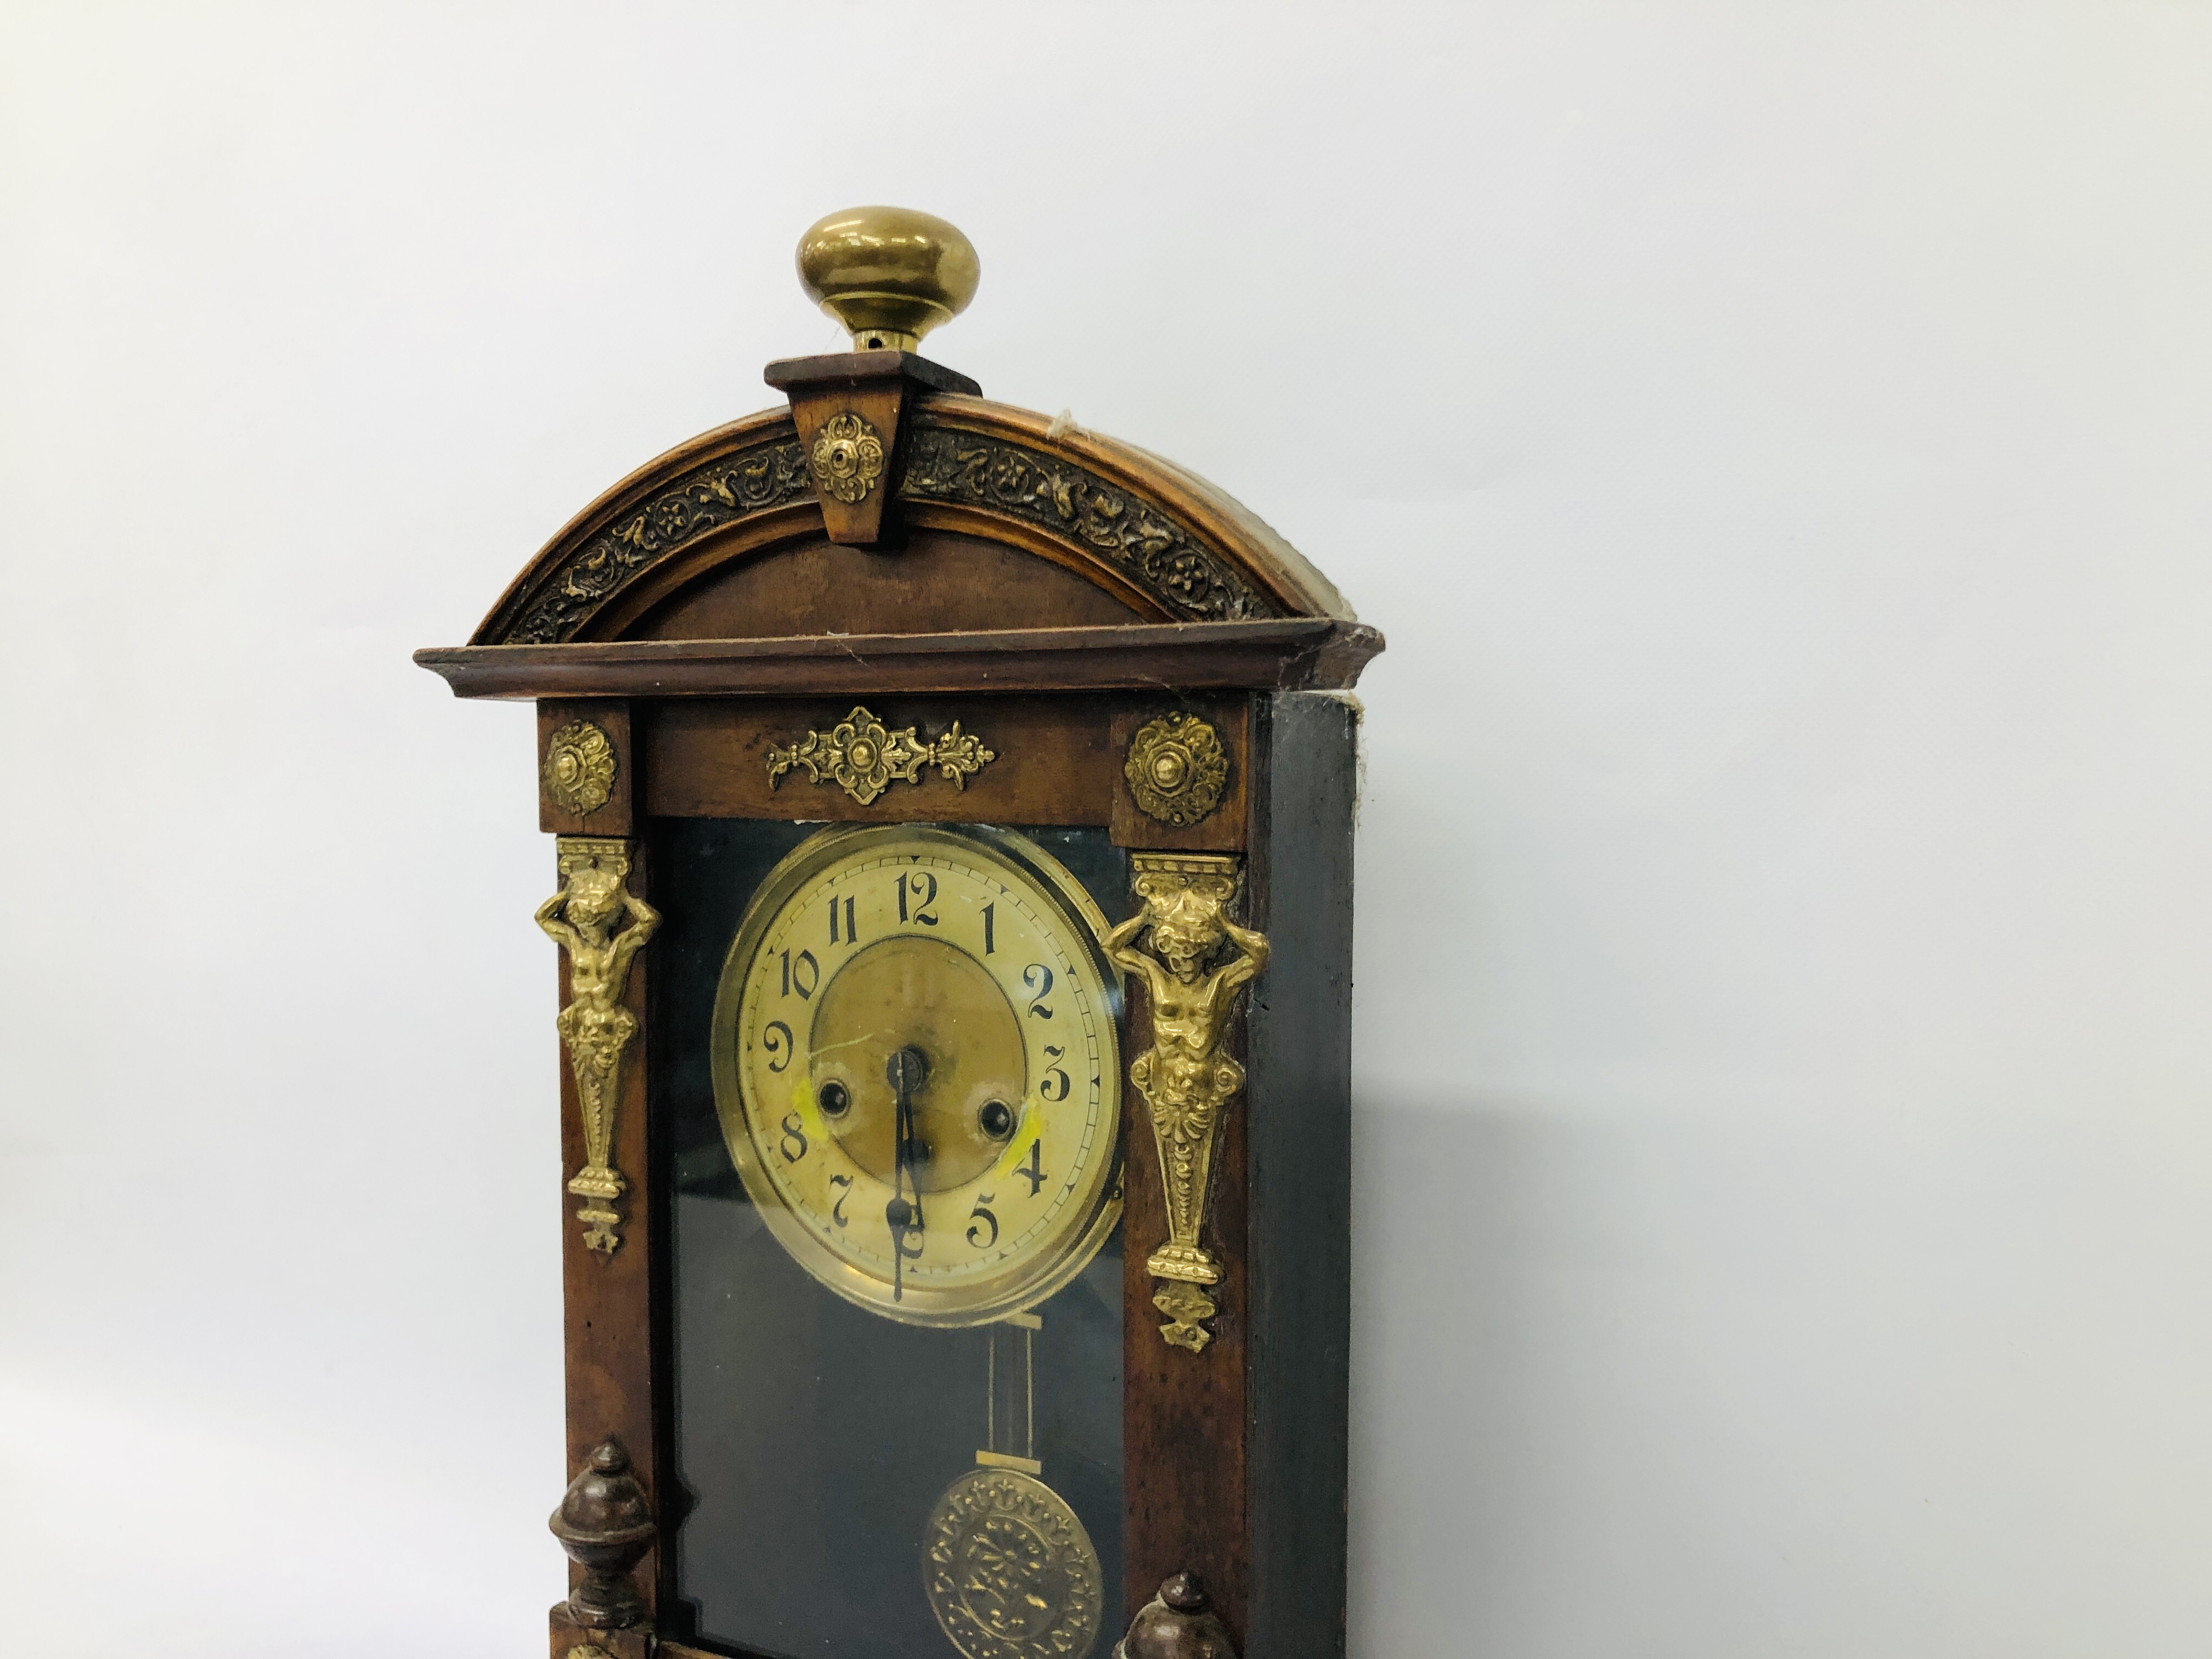 VINTAGE MAHOGANY CASED MANTEL CLOCK WITH APPLIED BRASS DETAIL - H 45CM. - Image 5 of 8